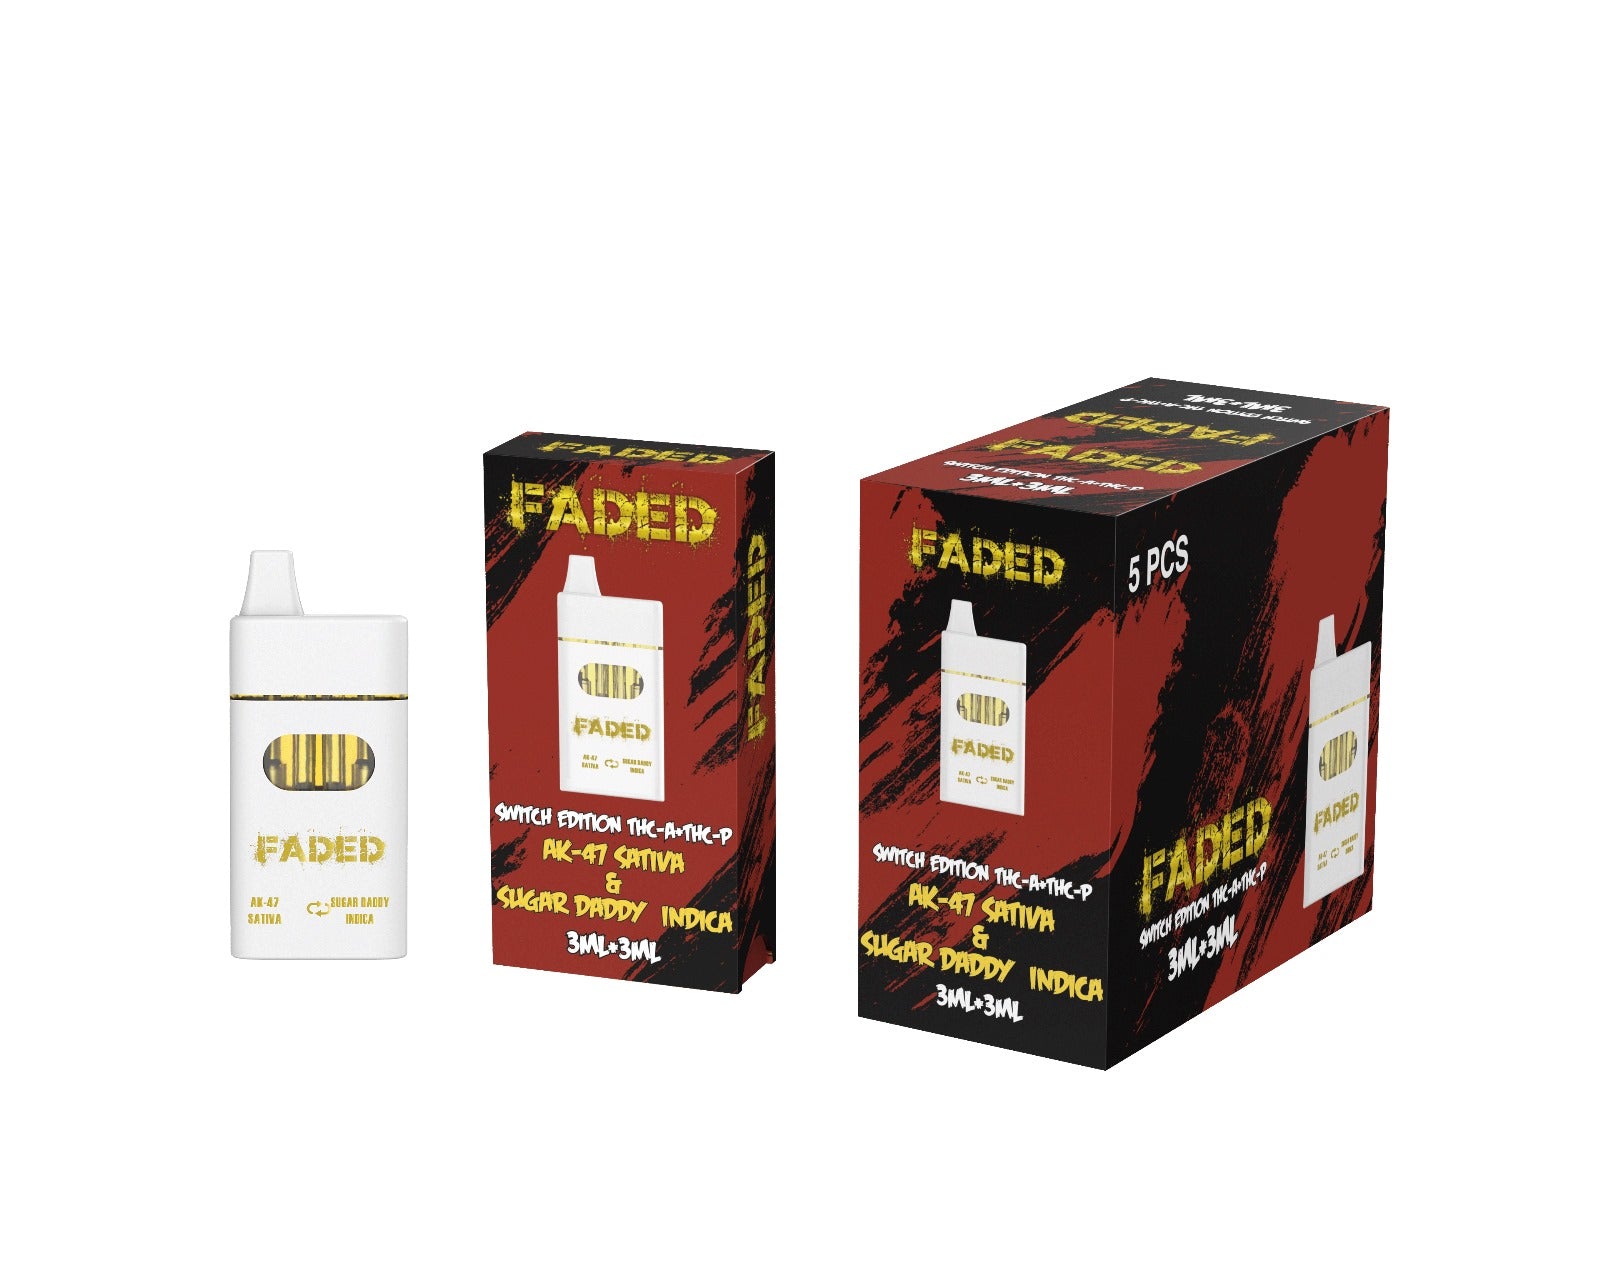 FADED SWITCH EDITION THC-A & THC-P 6ML DISPOSABLES | AK-47 SATIVA & SUGAR DADDY INDICA